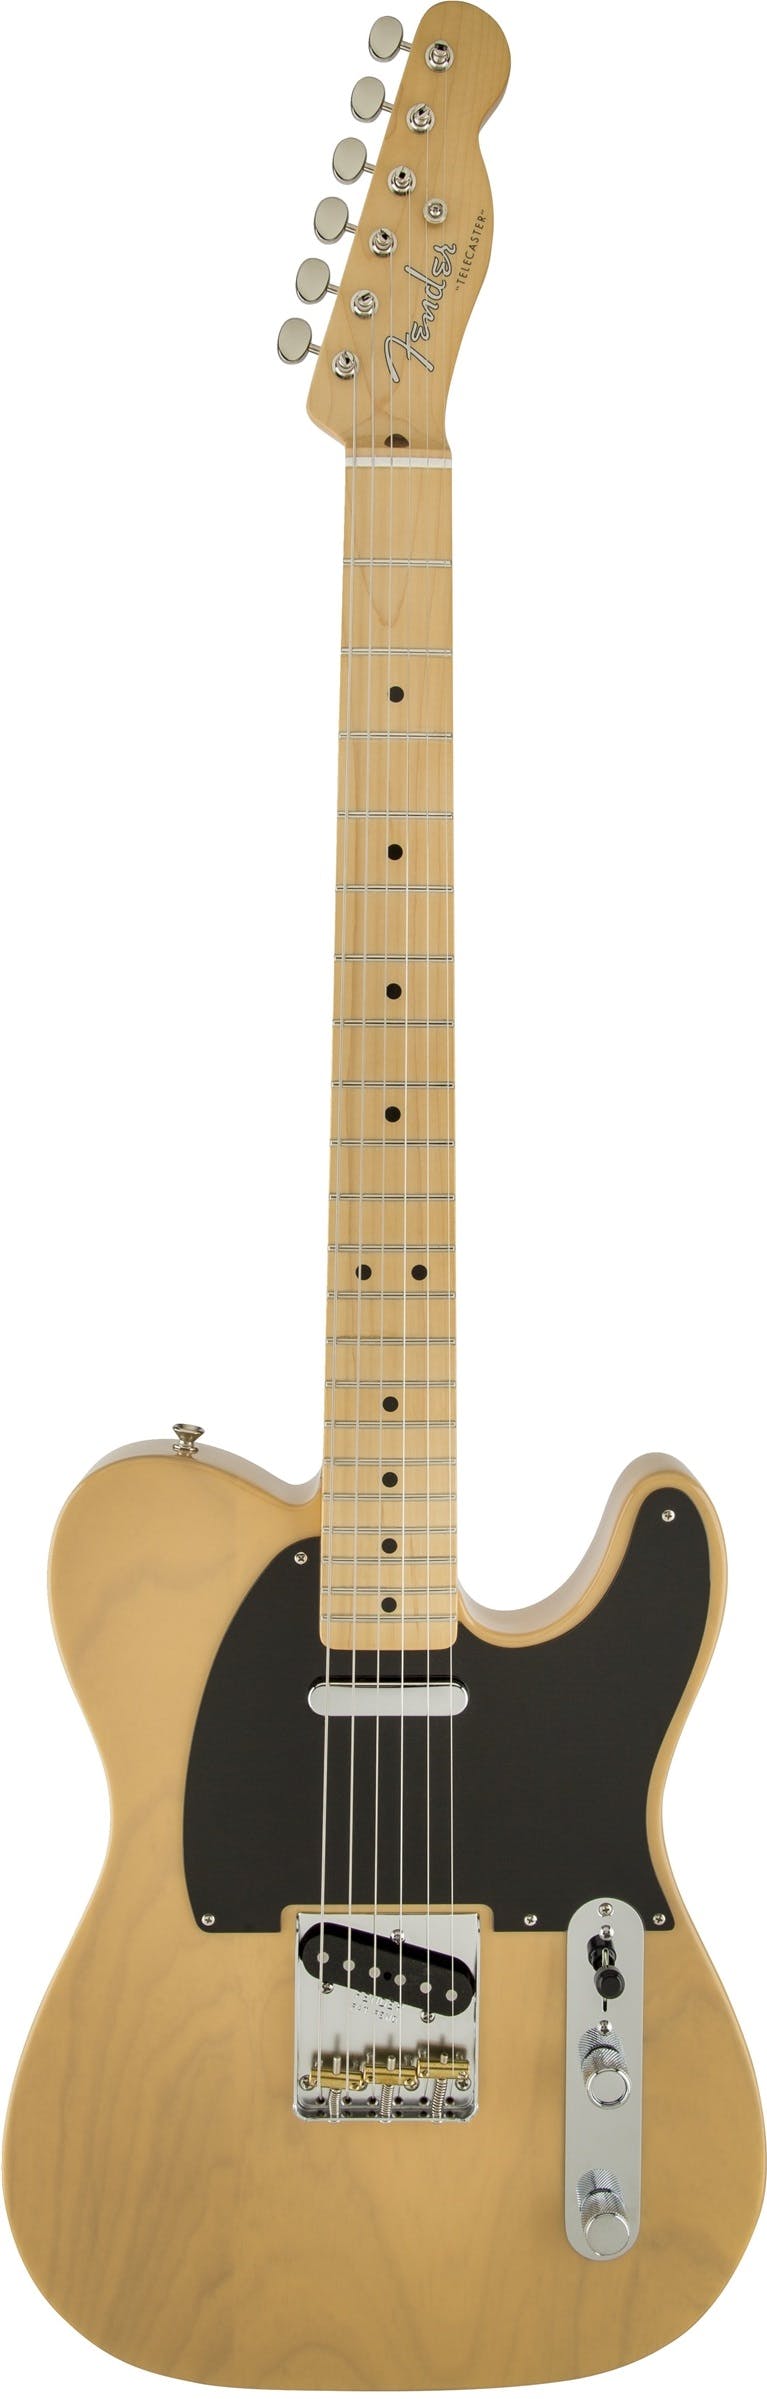 Ready football Paradise Fender Classic Player Baja Tele in Blonde with Maple Neck - Andertons Music  Co.